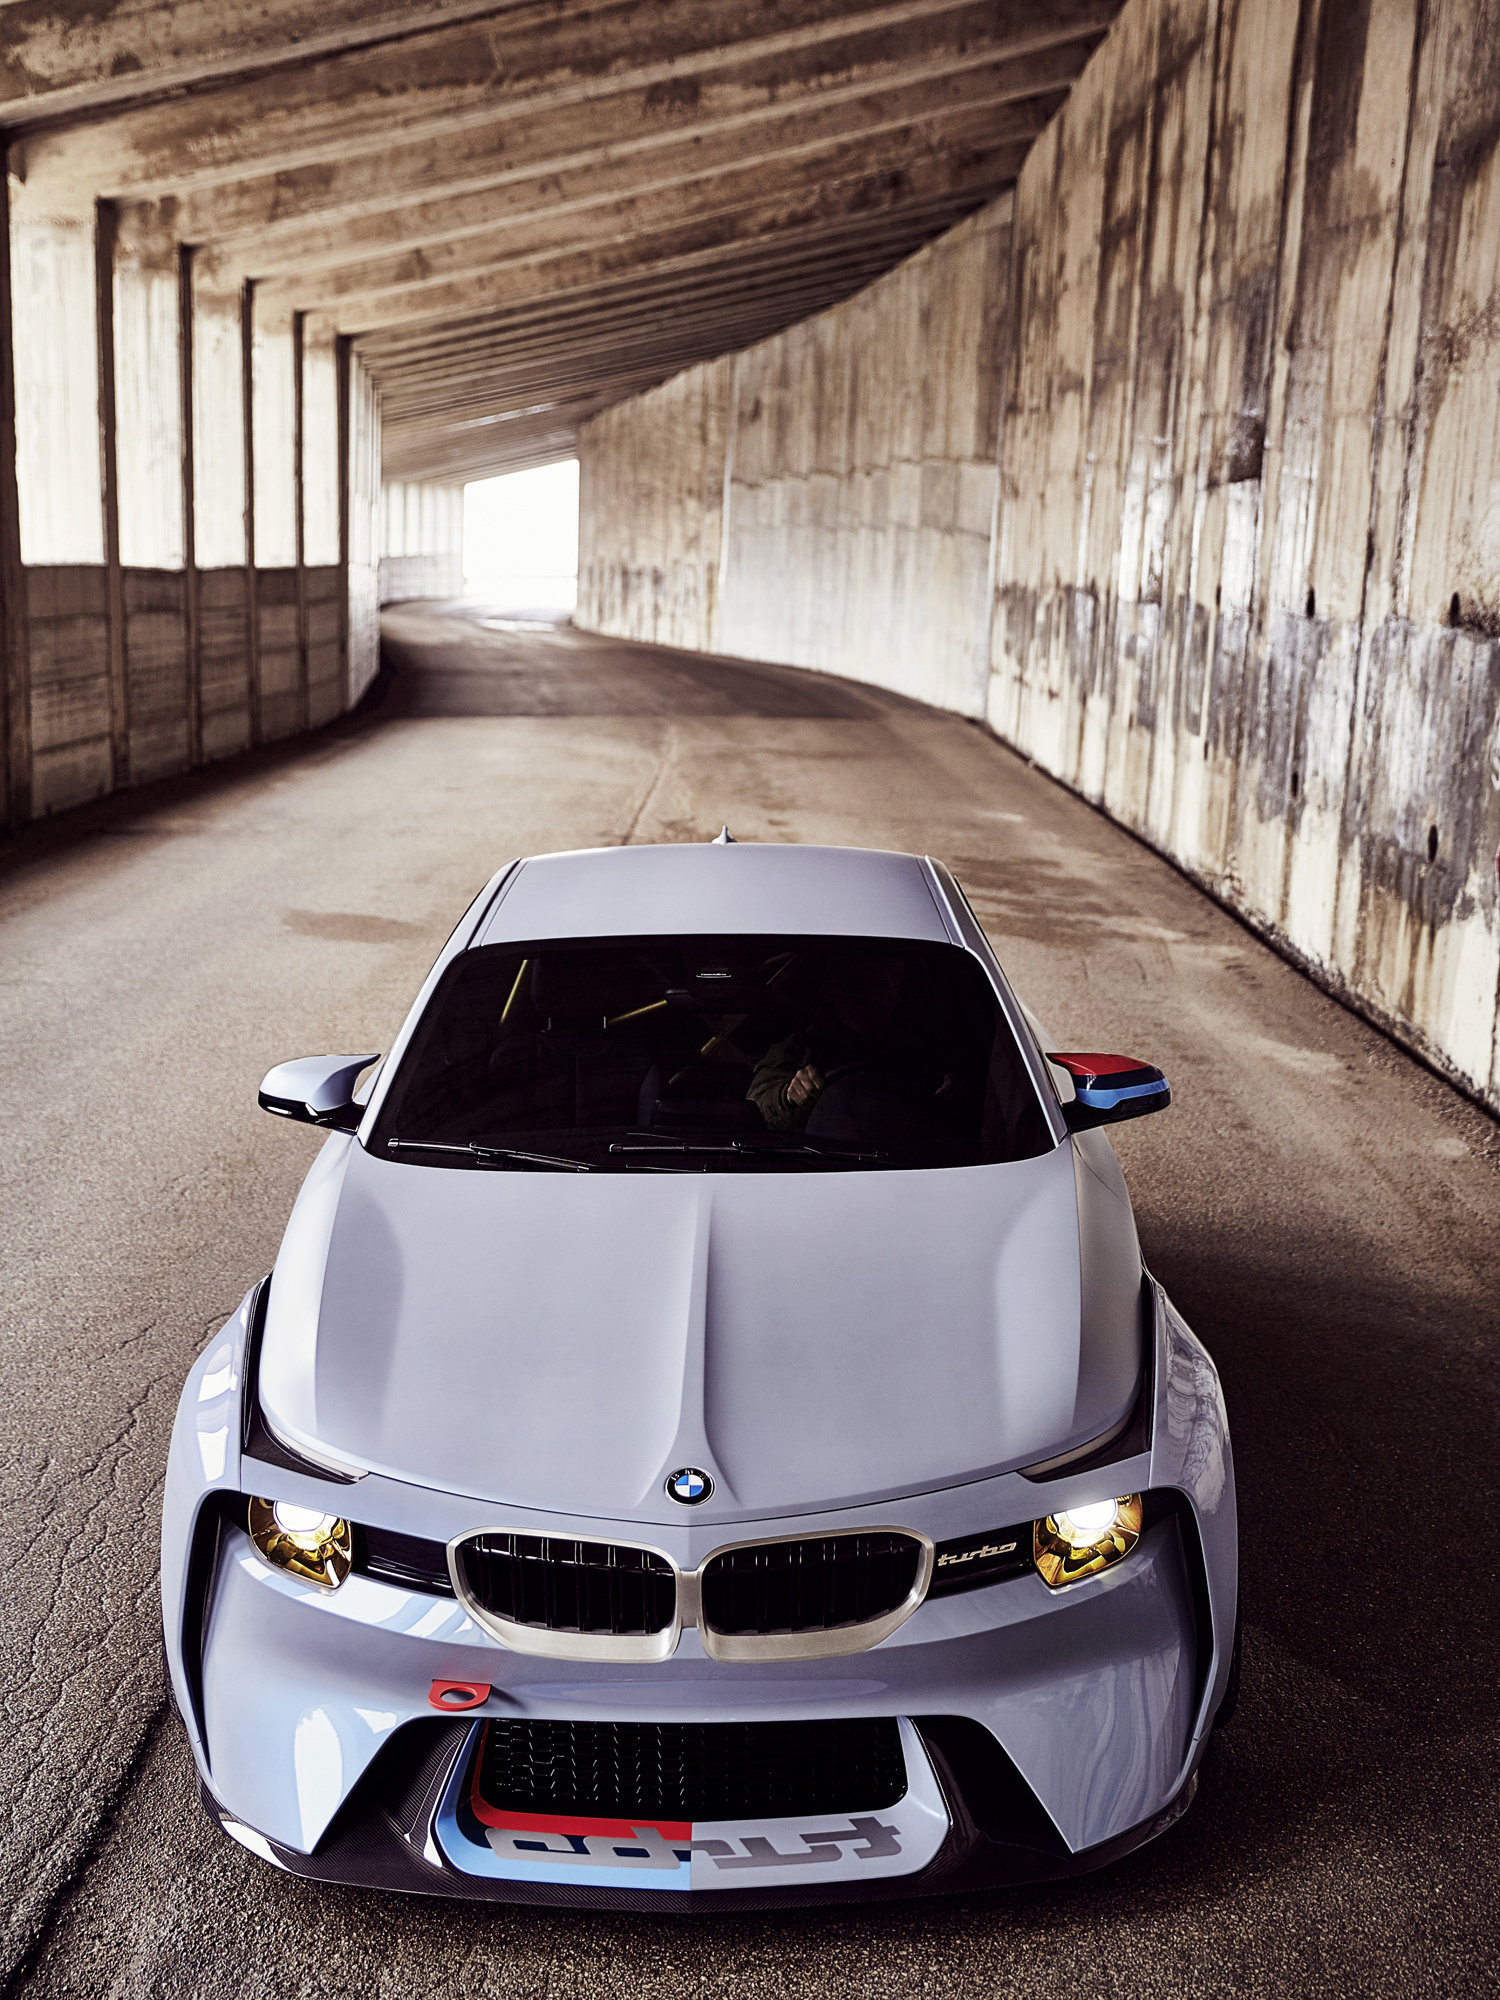 Bmw Hommage Wallpaper Image Photos Pictures Background